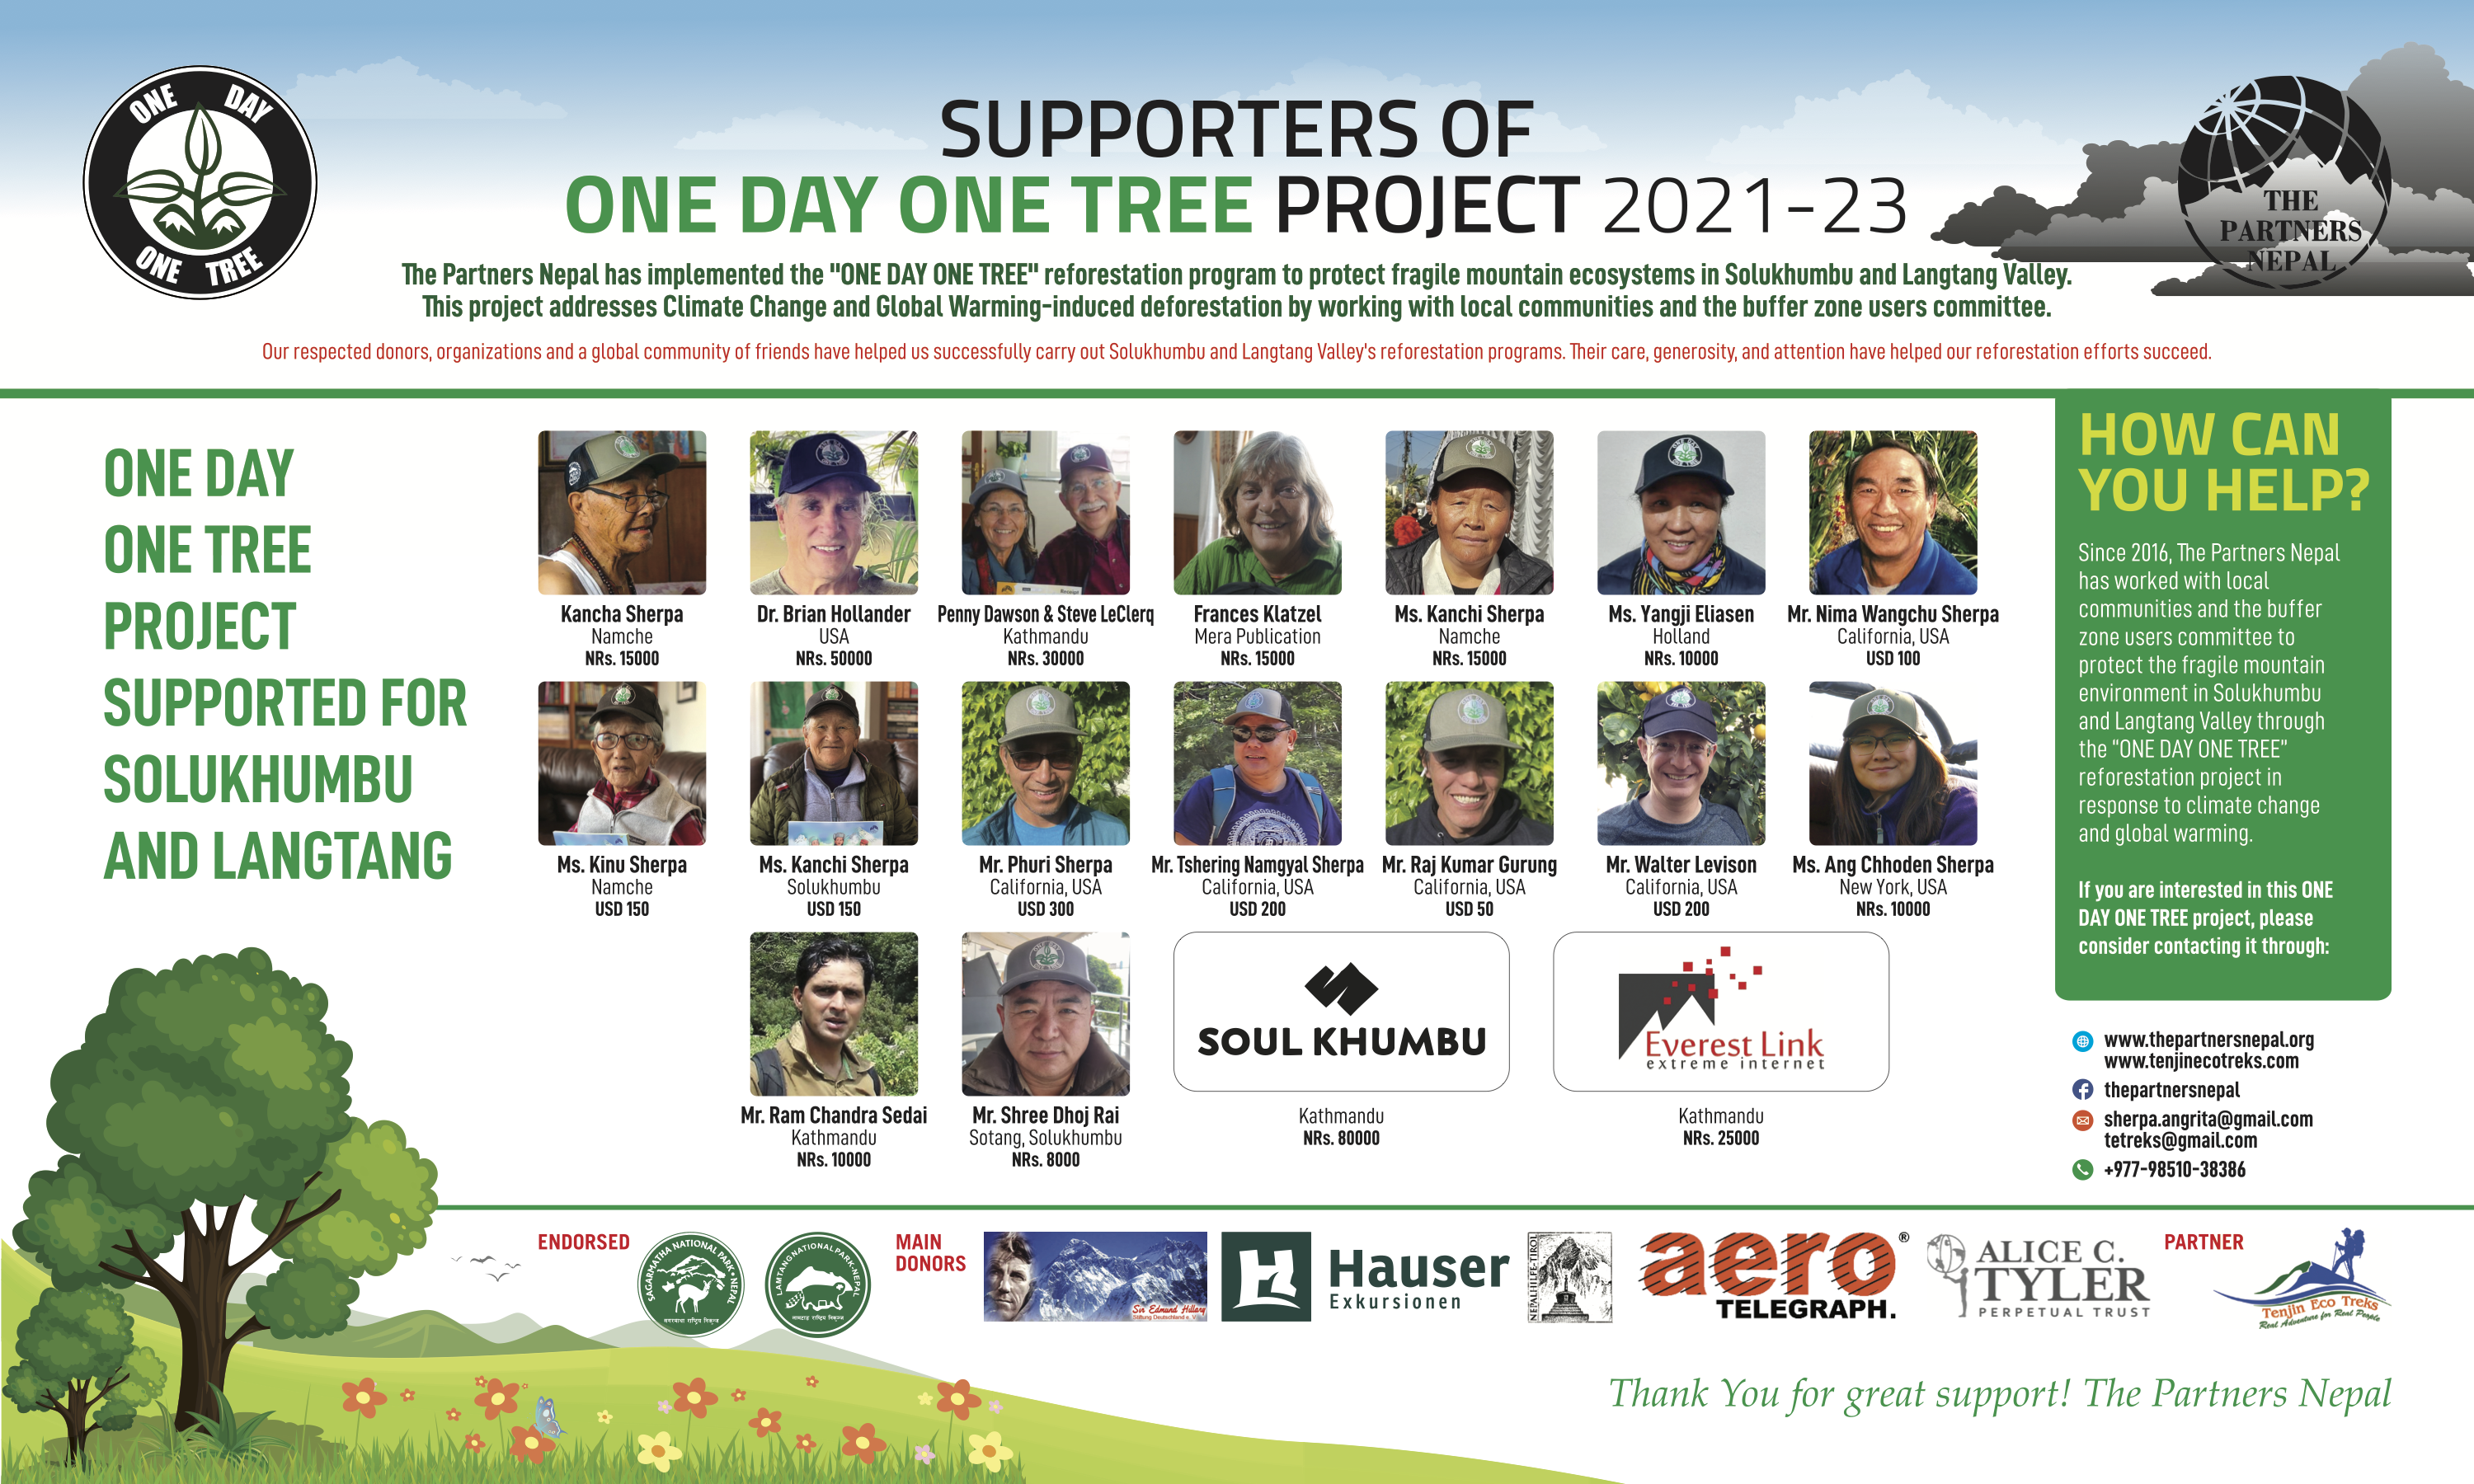 Supporters Of One Day One Tree In 2021-2023